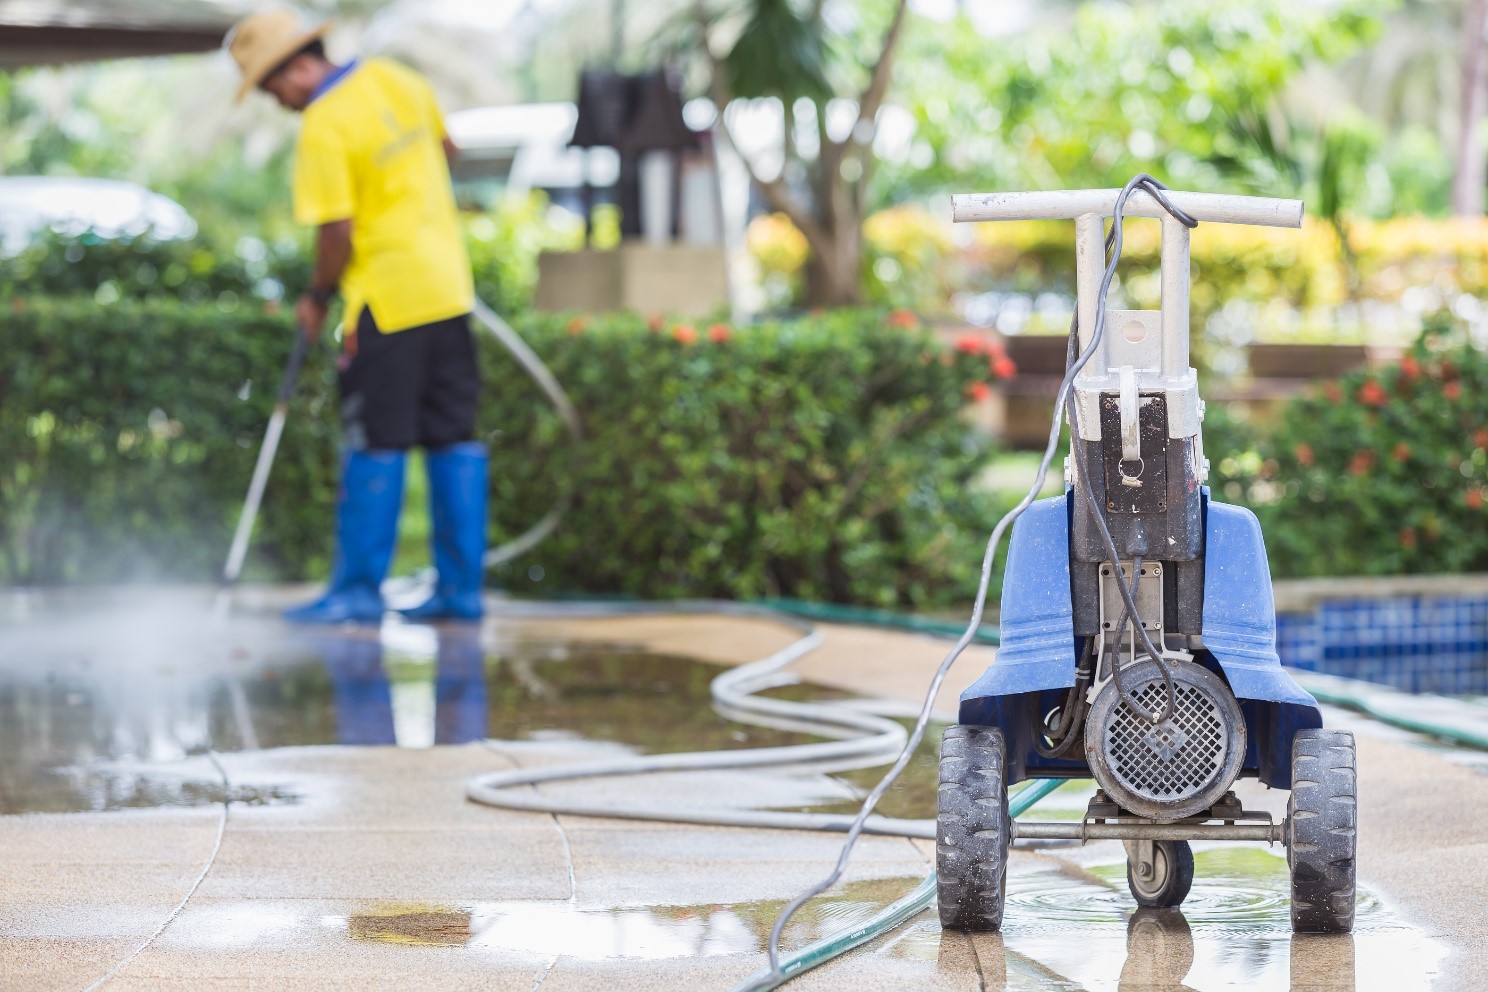 Why Hire Mr Clean Pressure Washing Services?